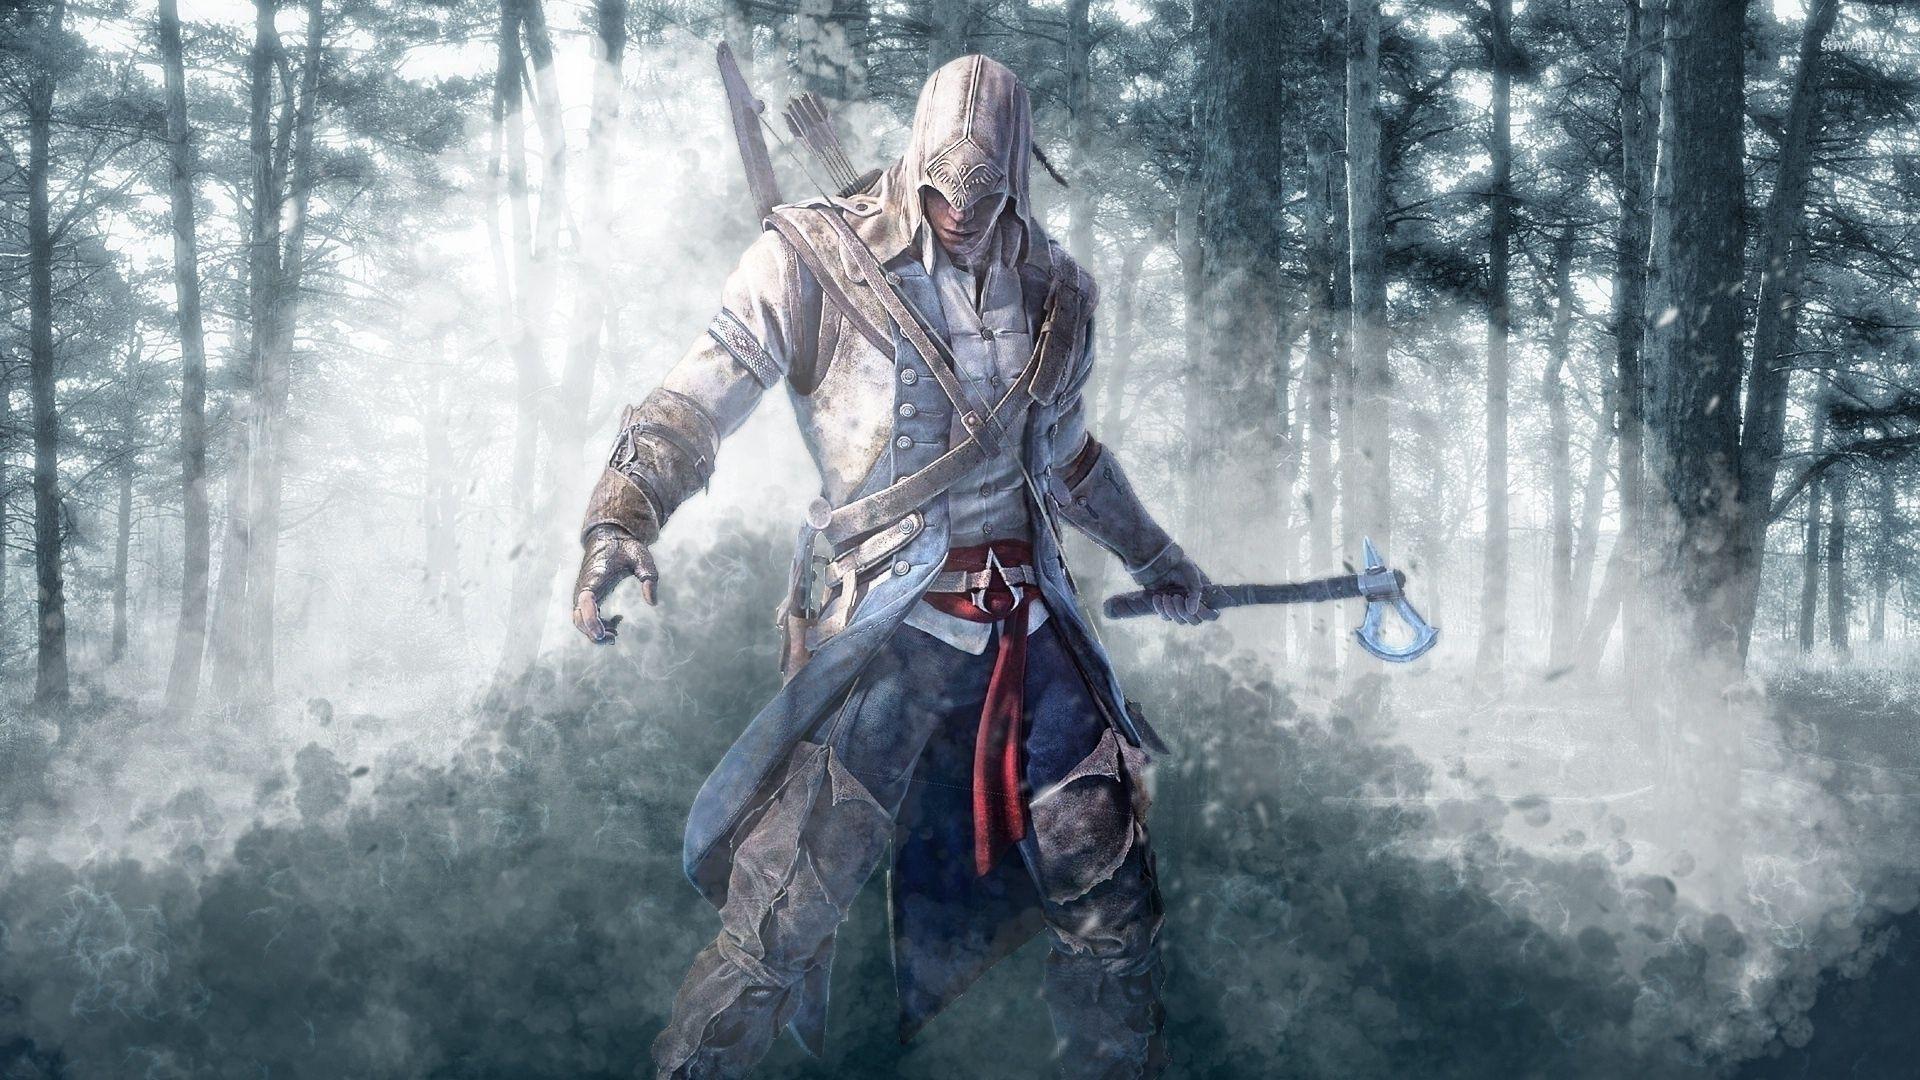 Connor Kenway with an ax's Creed III wallpaper